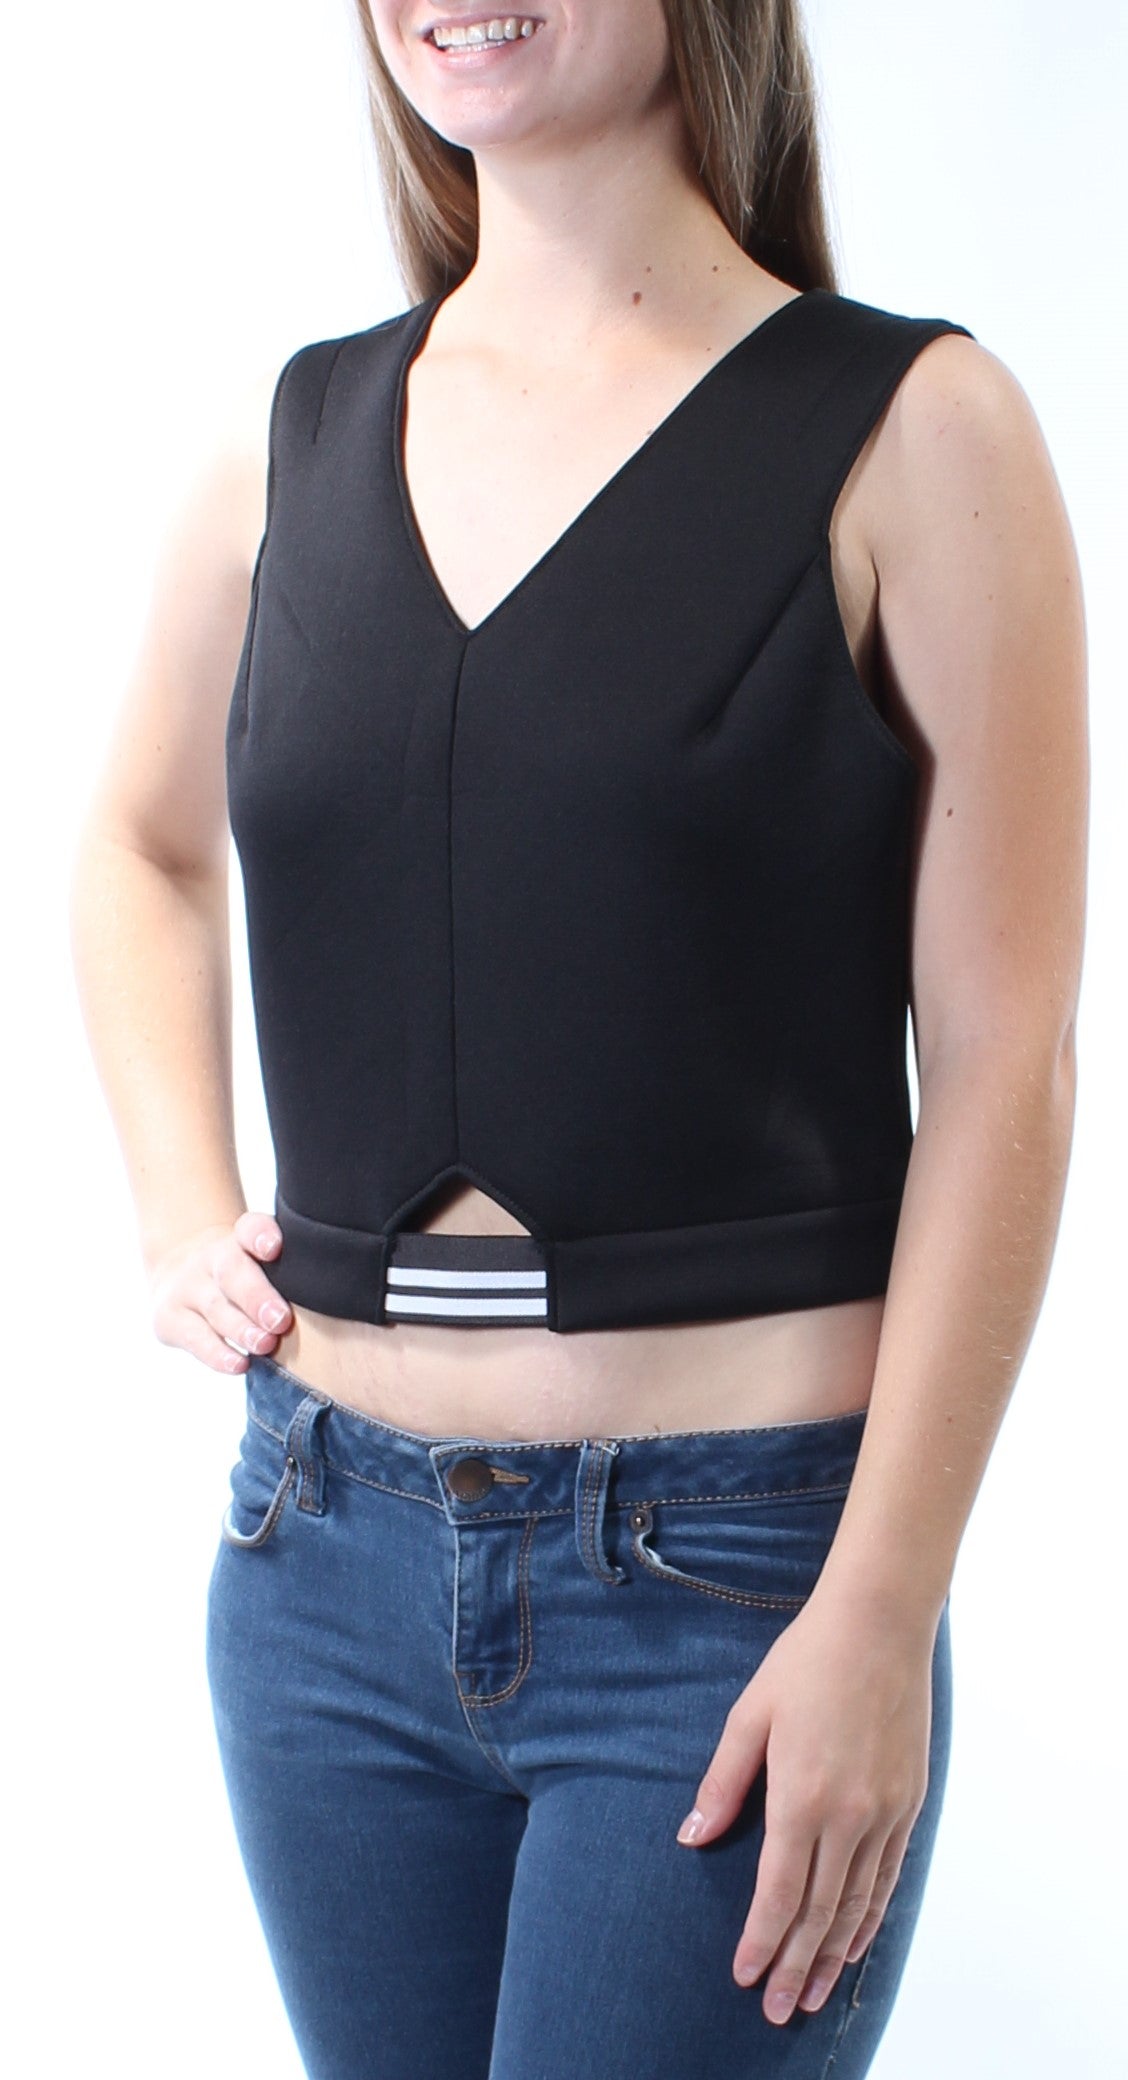 KIIND OF Womens Black Cut Out Sleeveless V Neck Crop Top